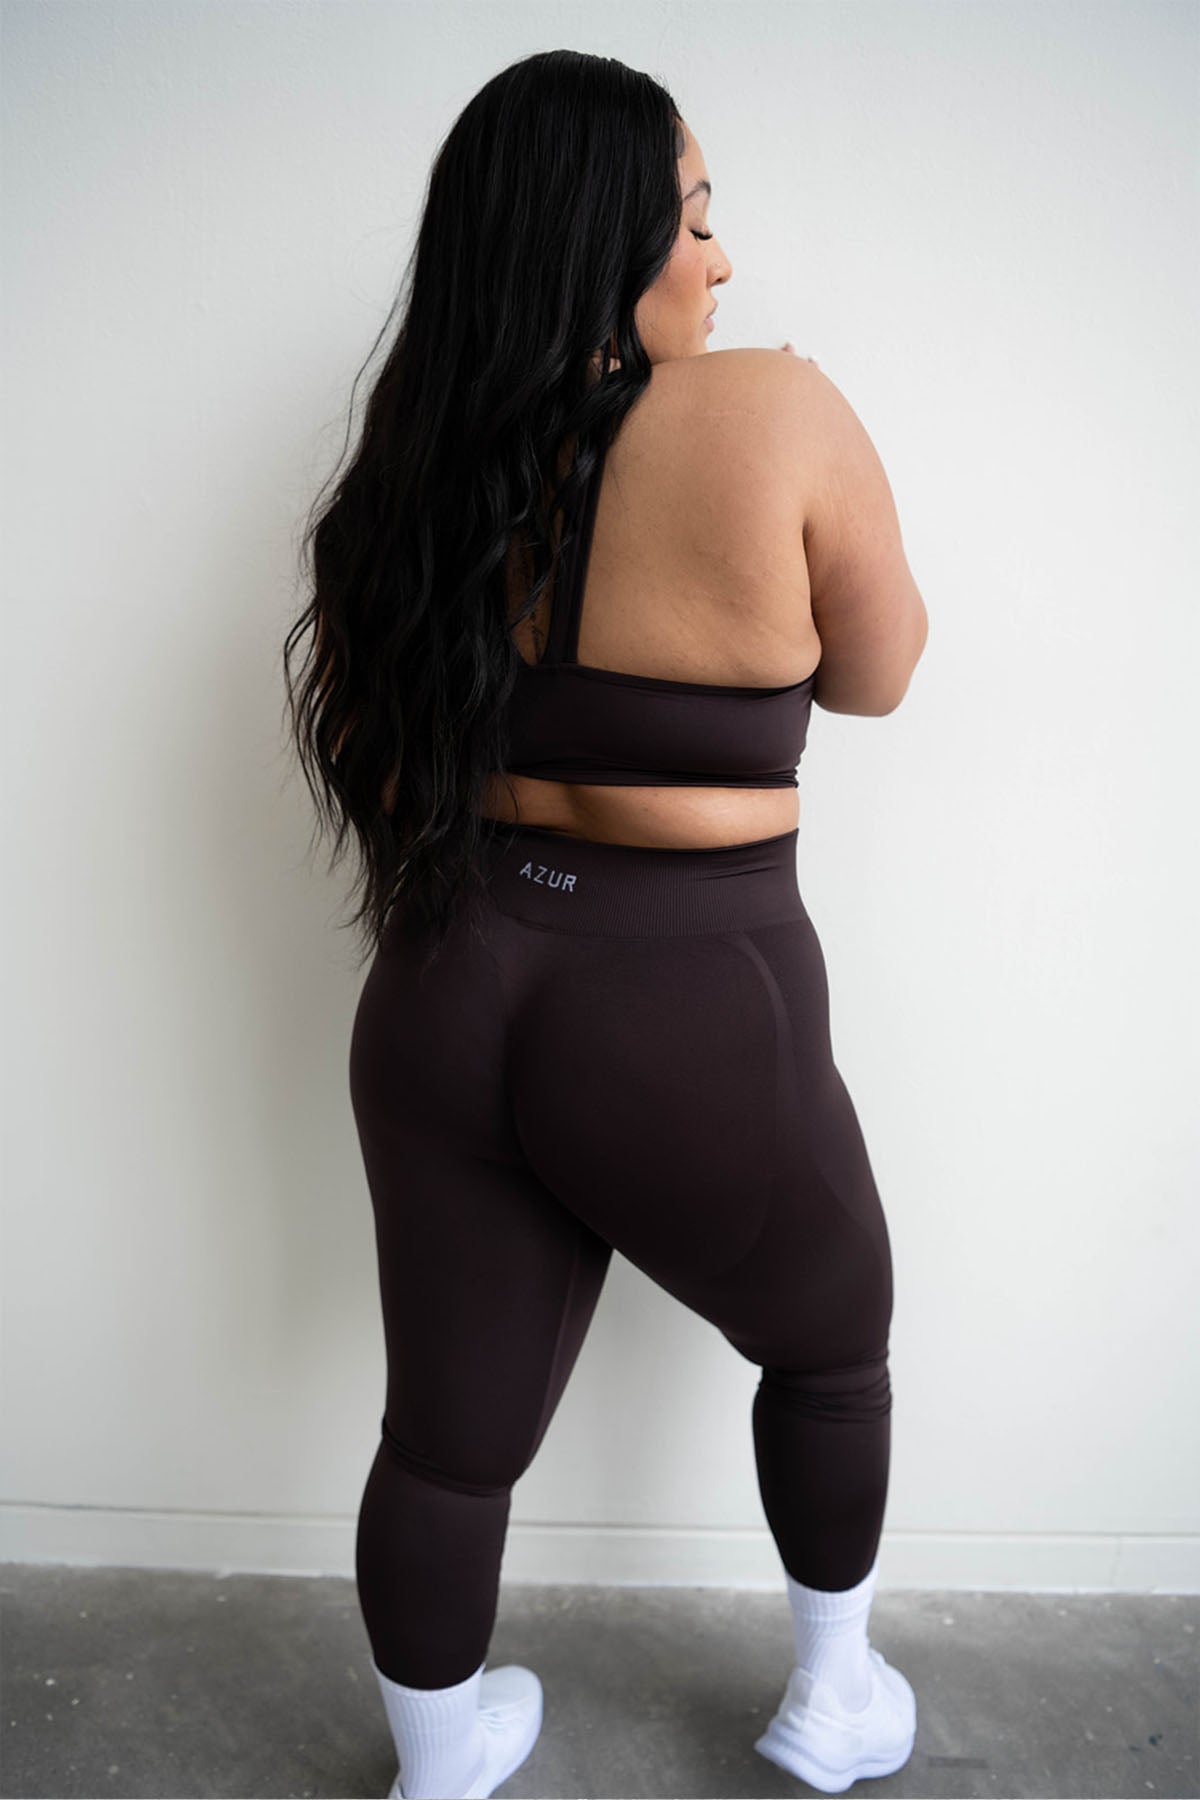 Seamless leggings perfect pair to wear under clothing or by itself